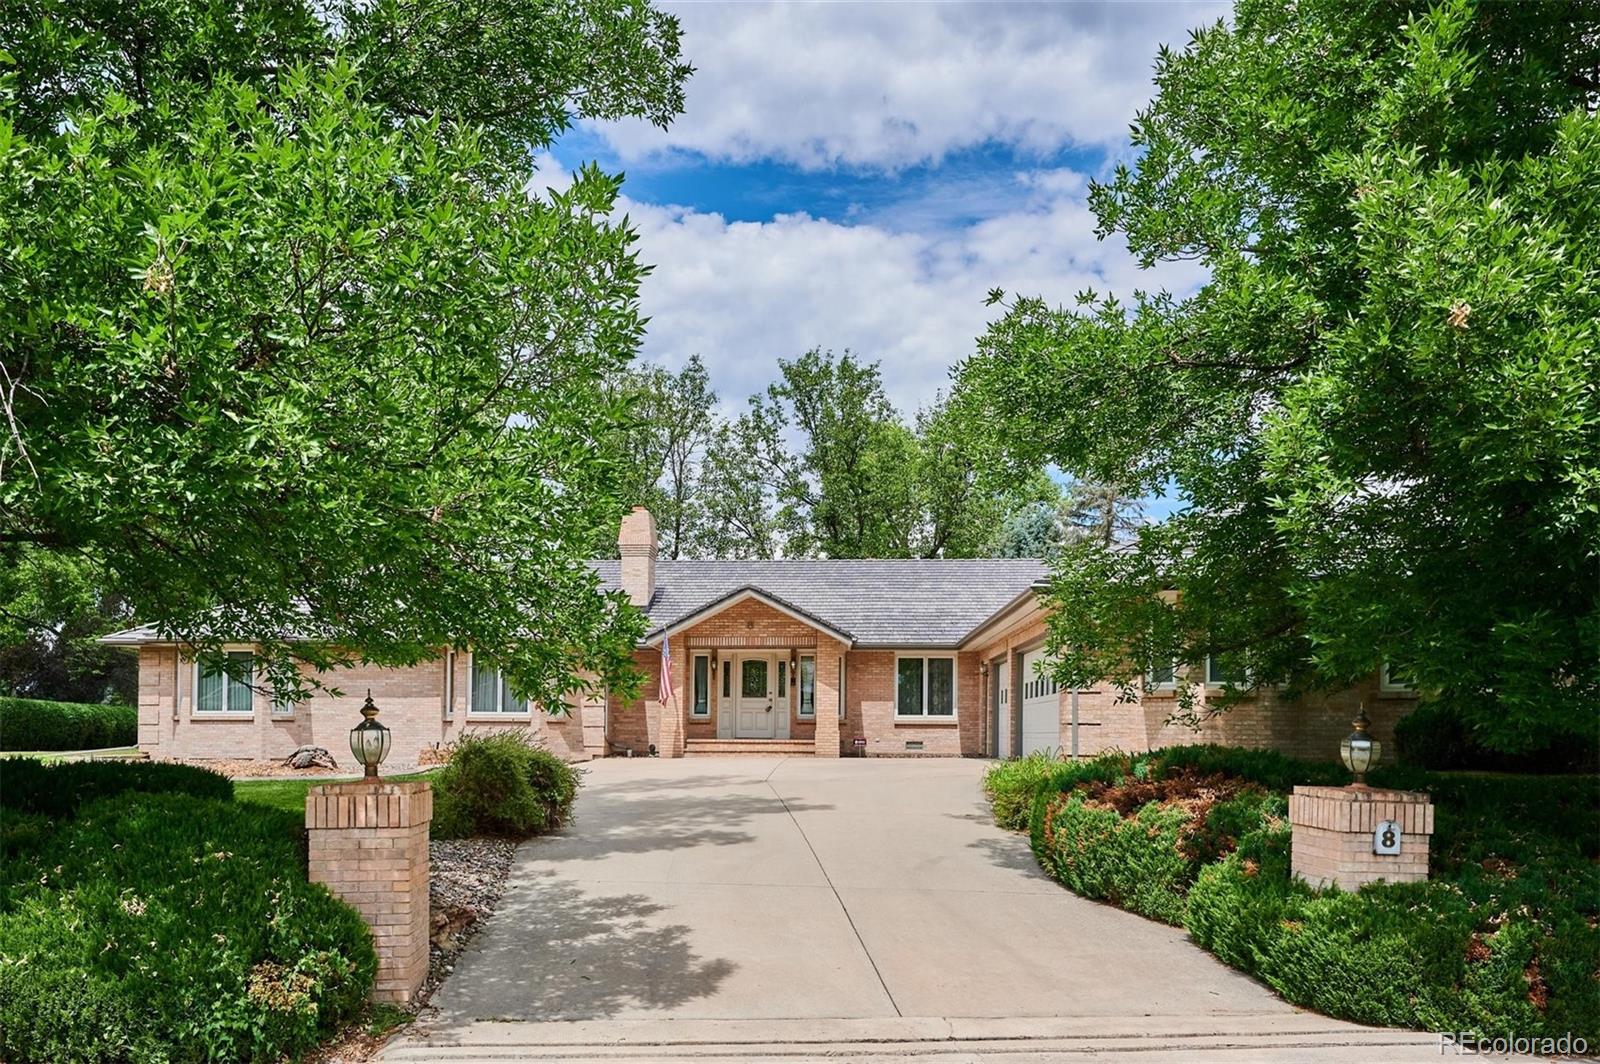 8  wedge way, littleton sold home. Closed on 2023-09-22 for $1,900,000.